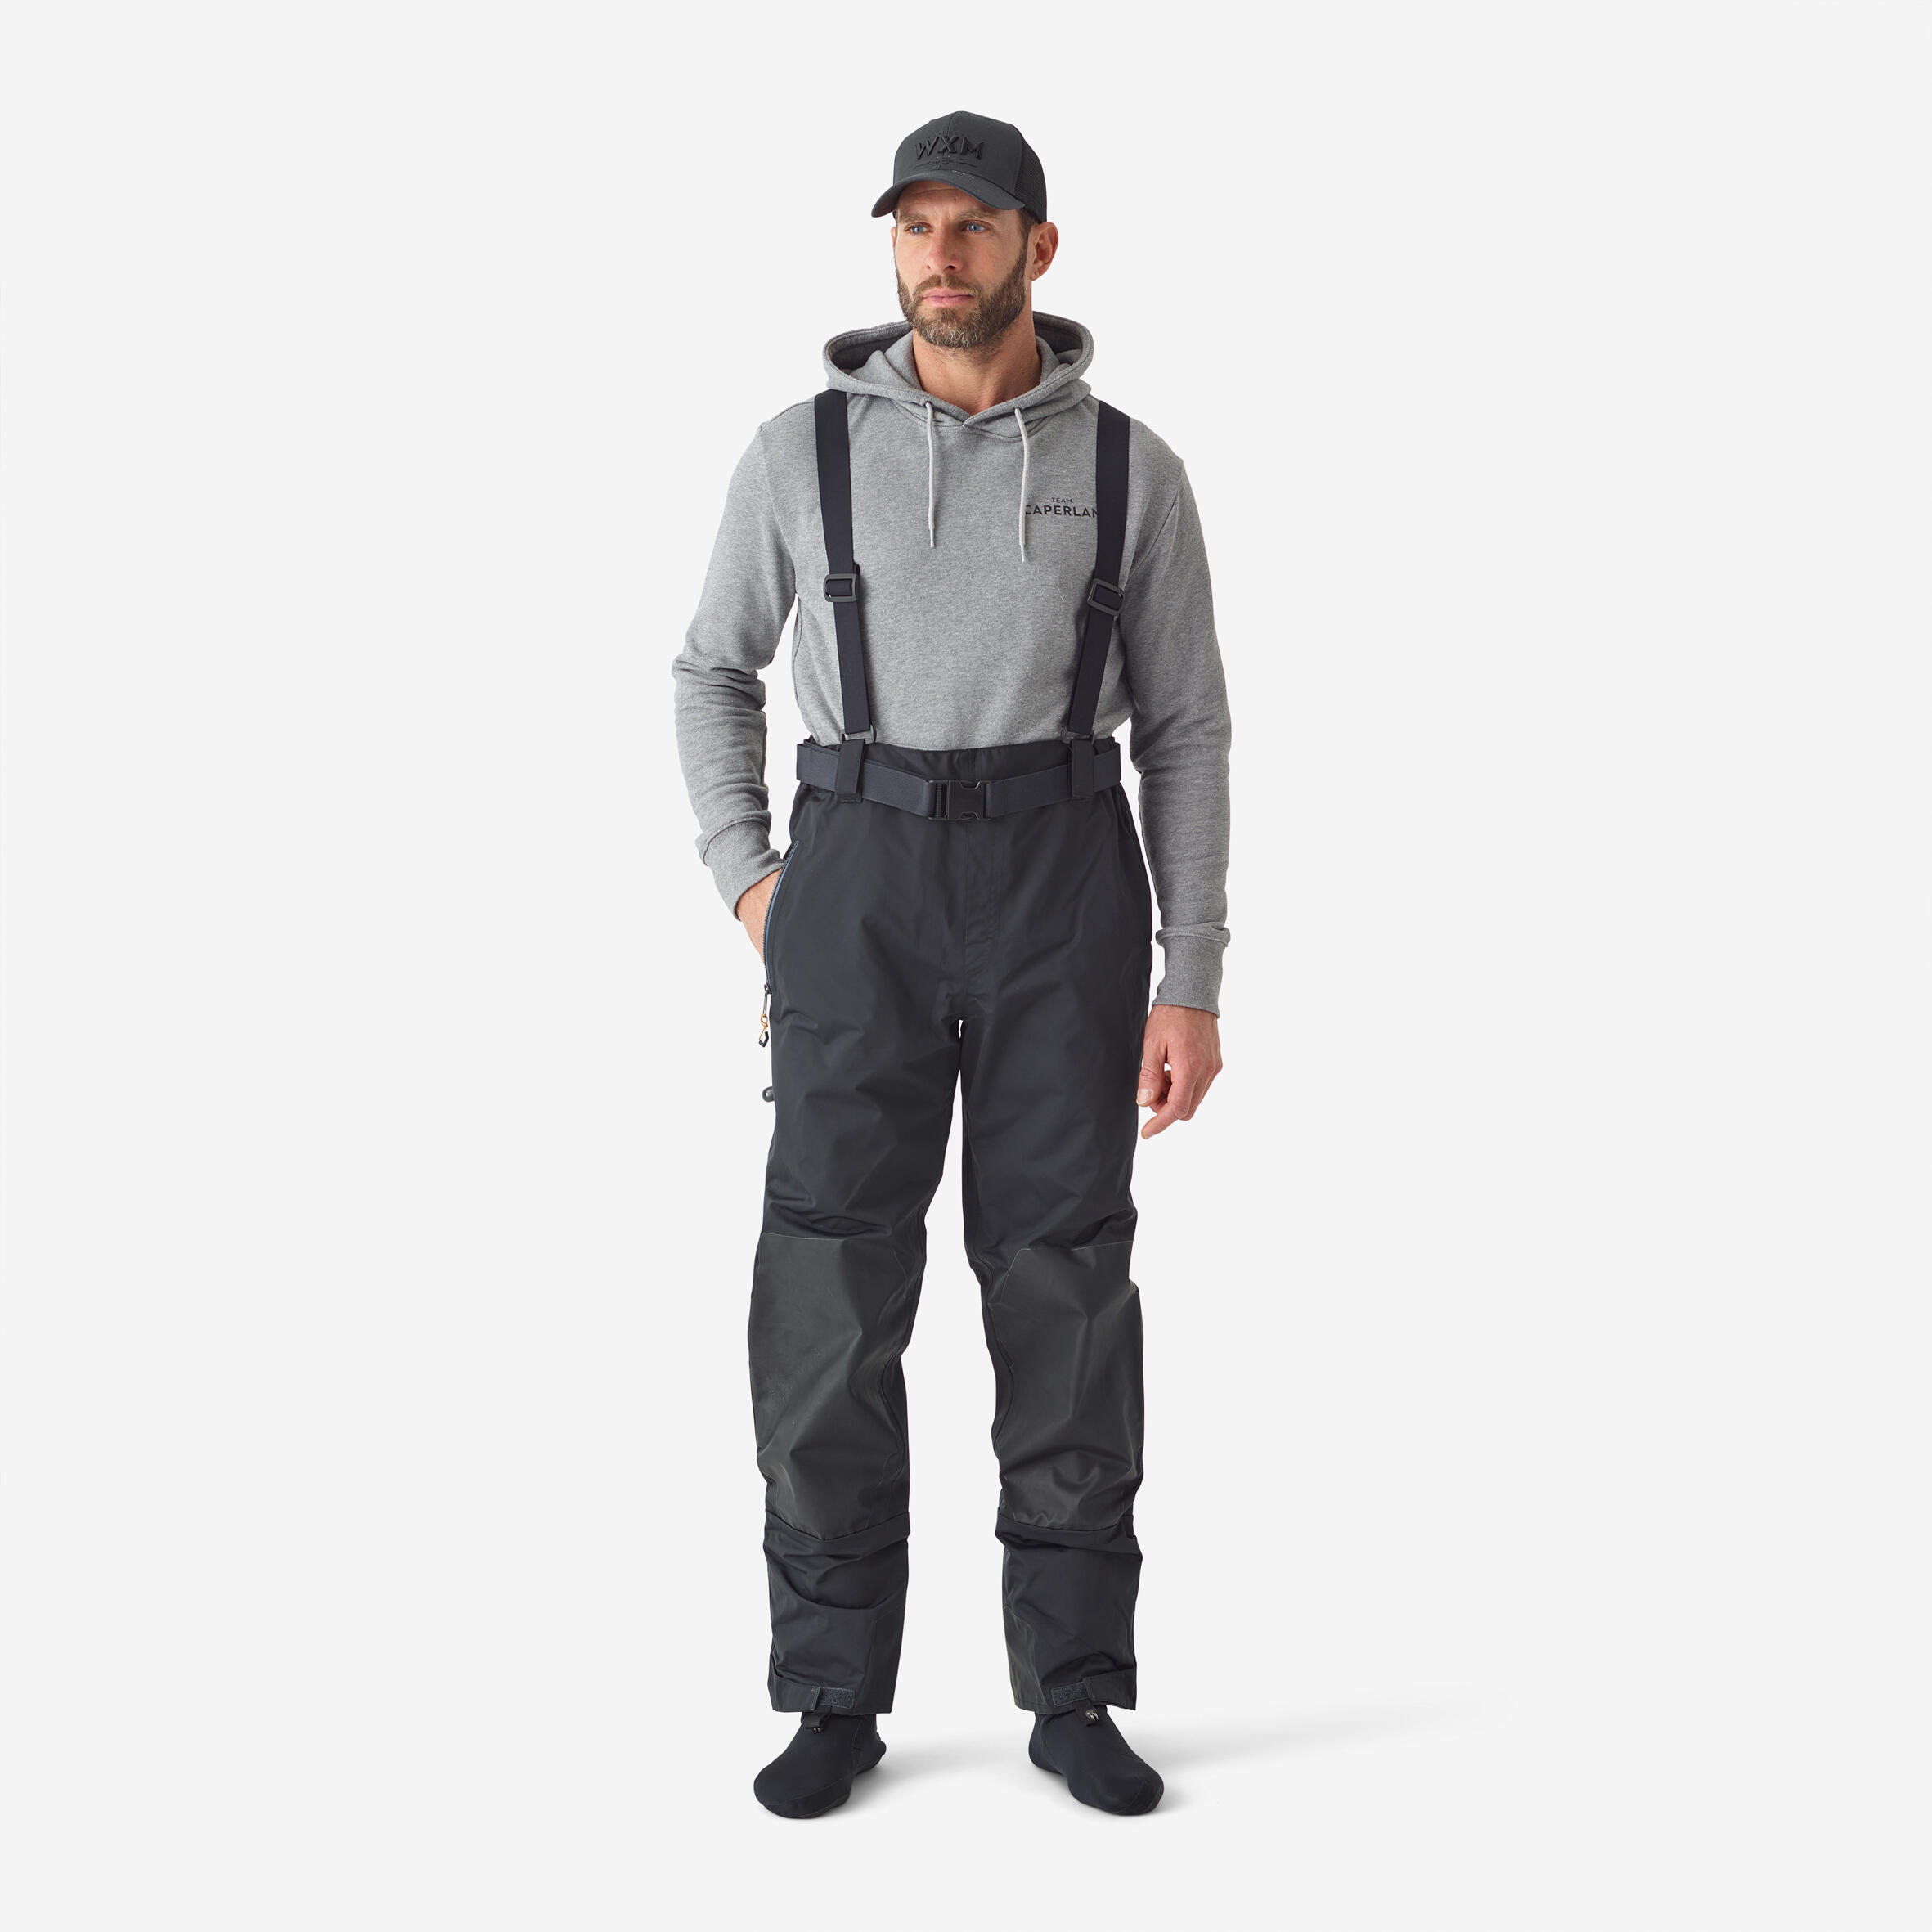 Caperlan Fishing Trousers Wading 900 Waterproof And Breathable With Neoprene Booties